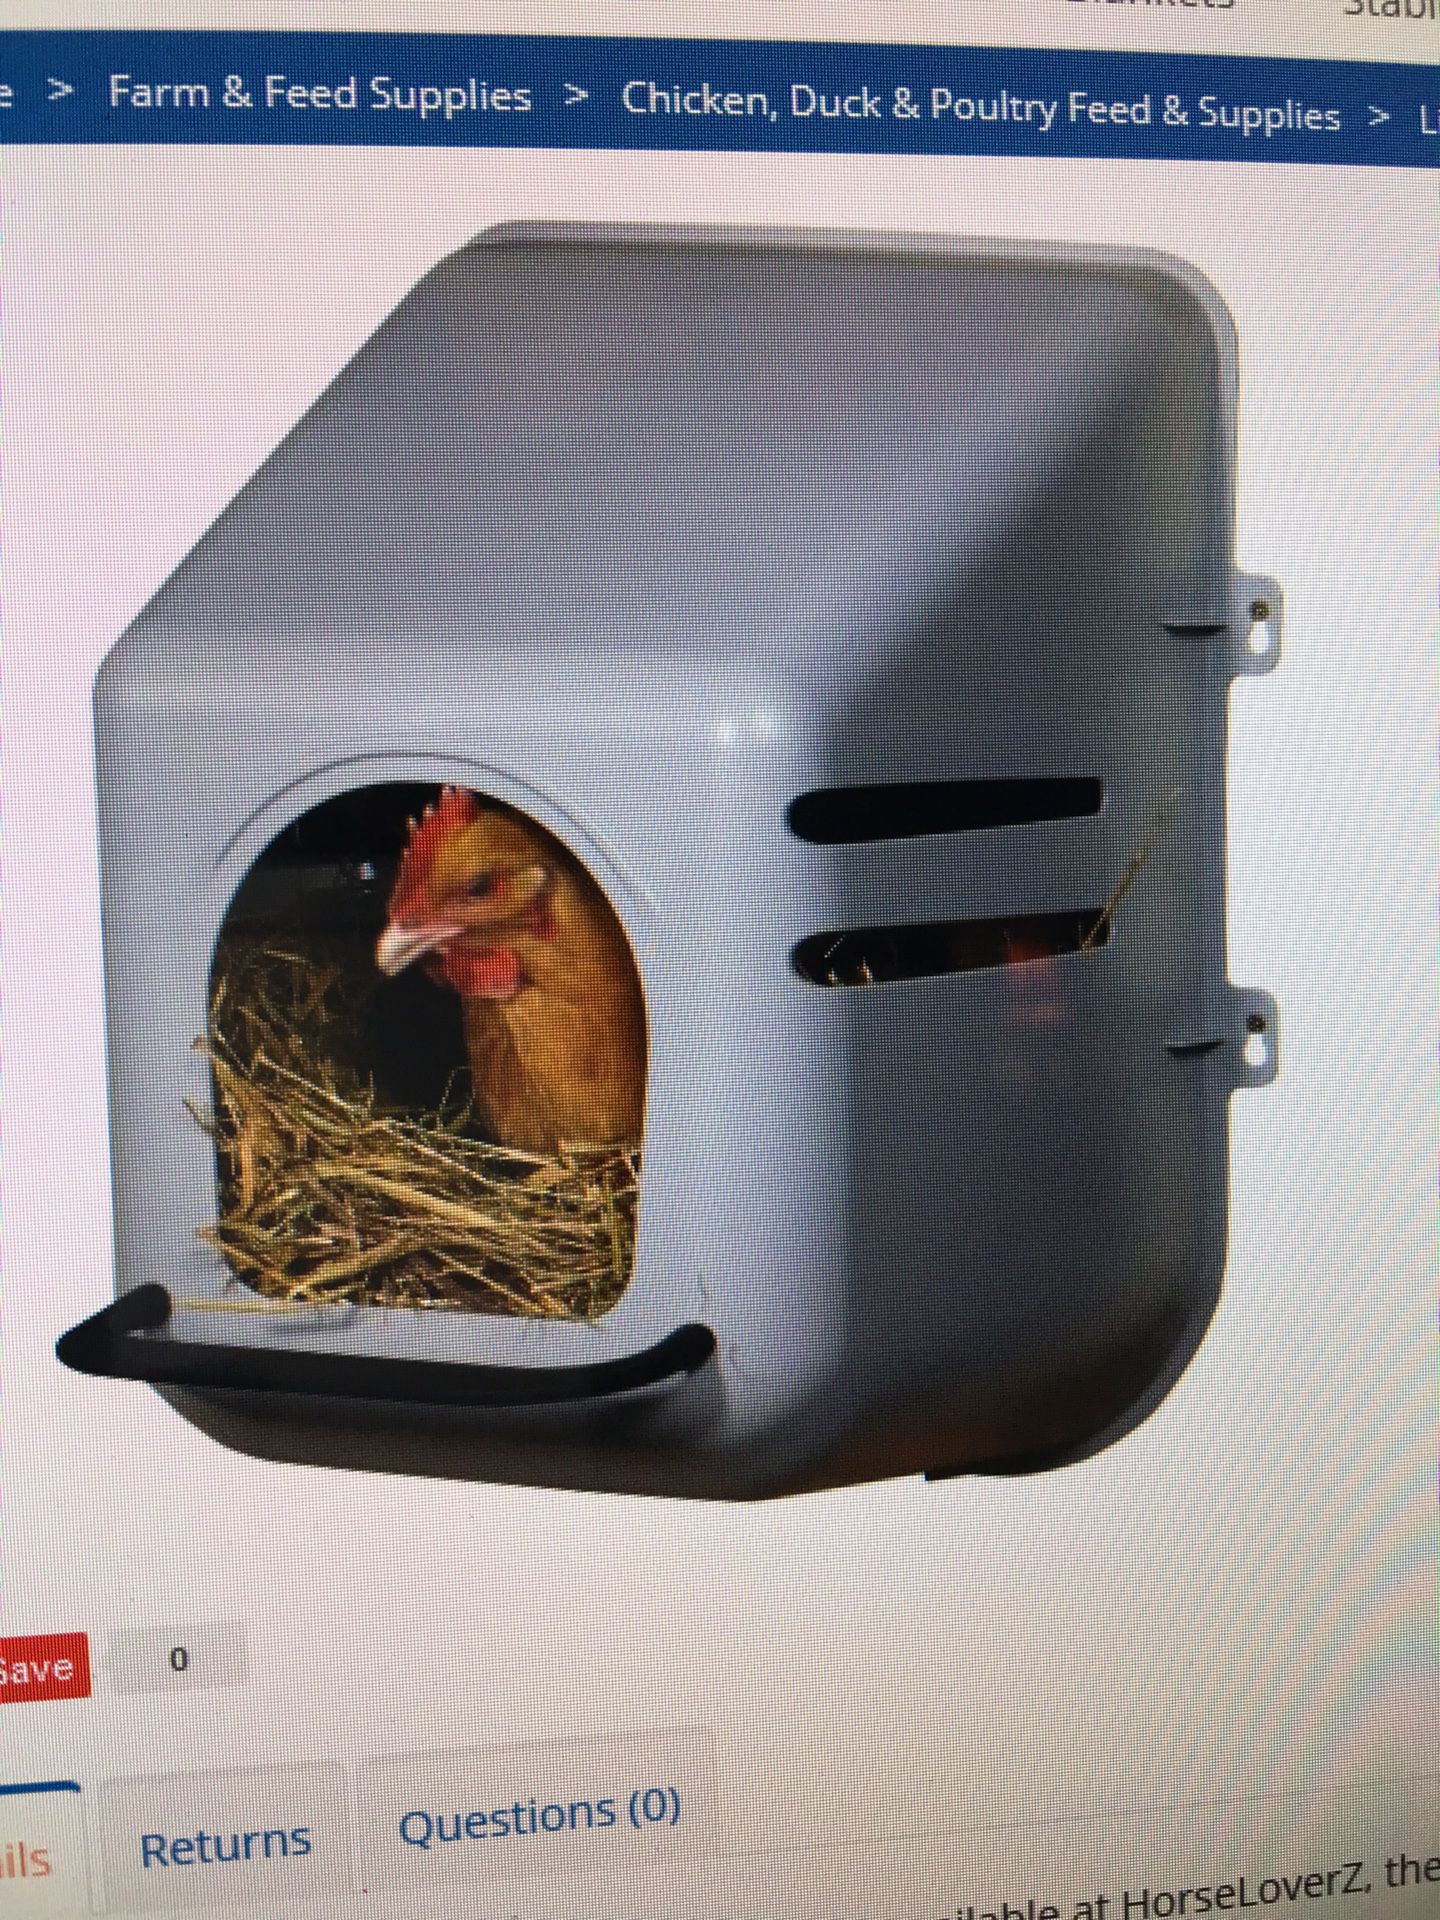 Chicken nesting boxes